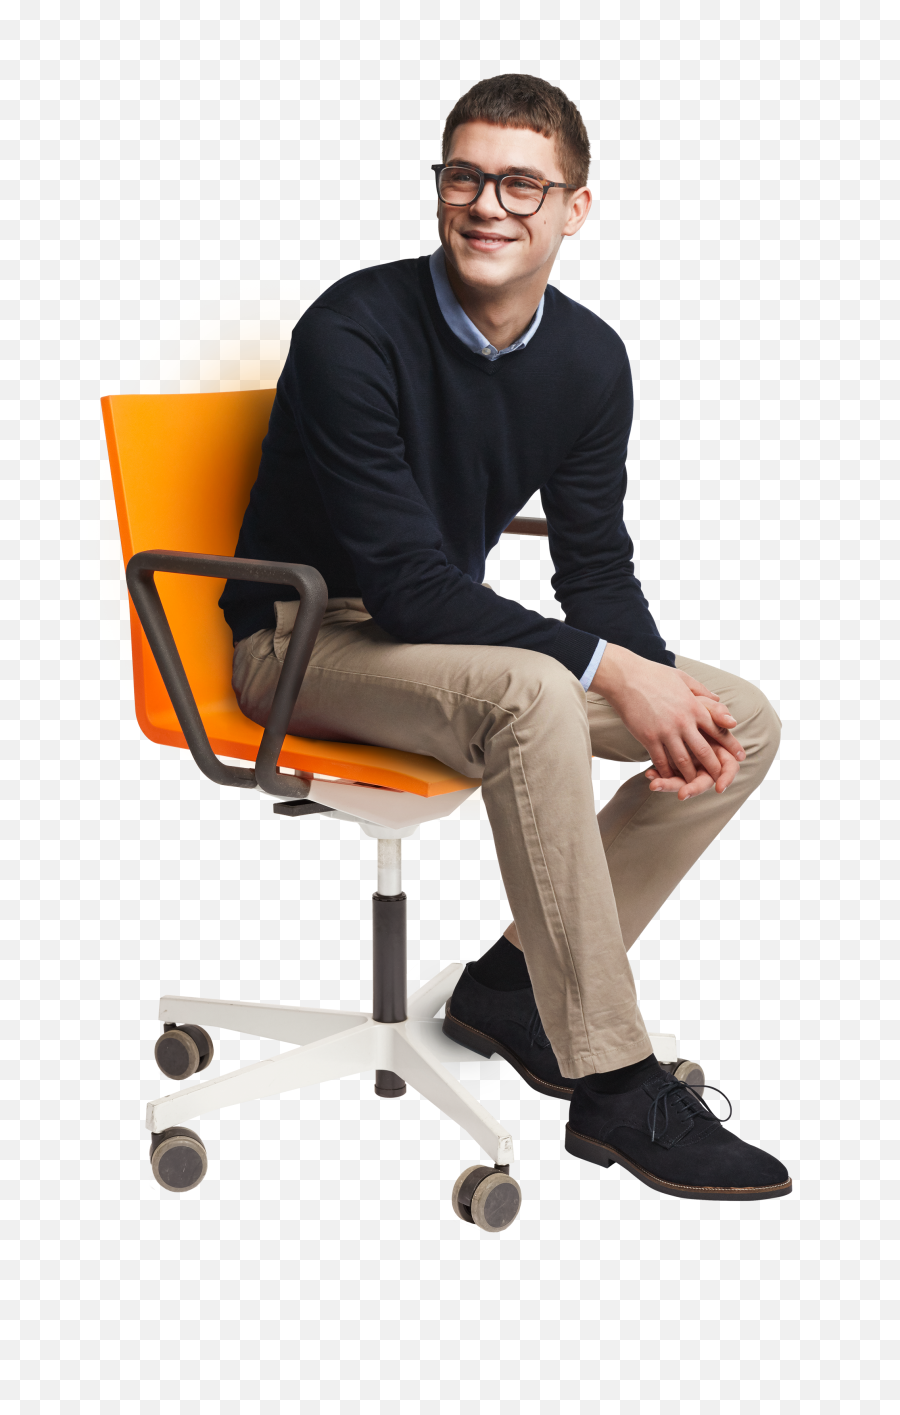 Download People Sitting - People Sitting On Chair,People Sitting Png